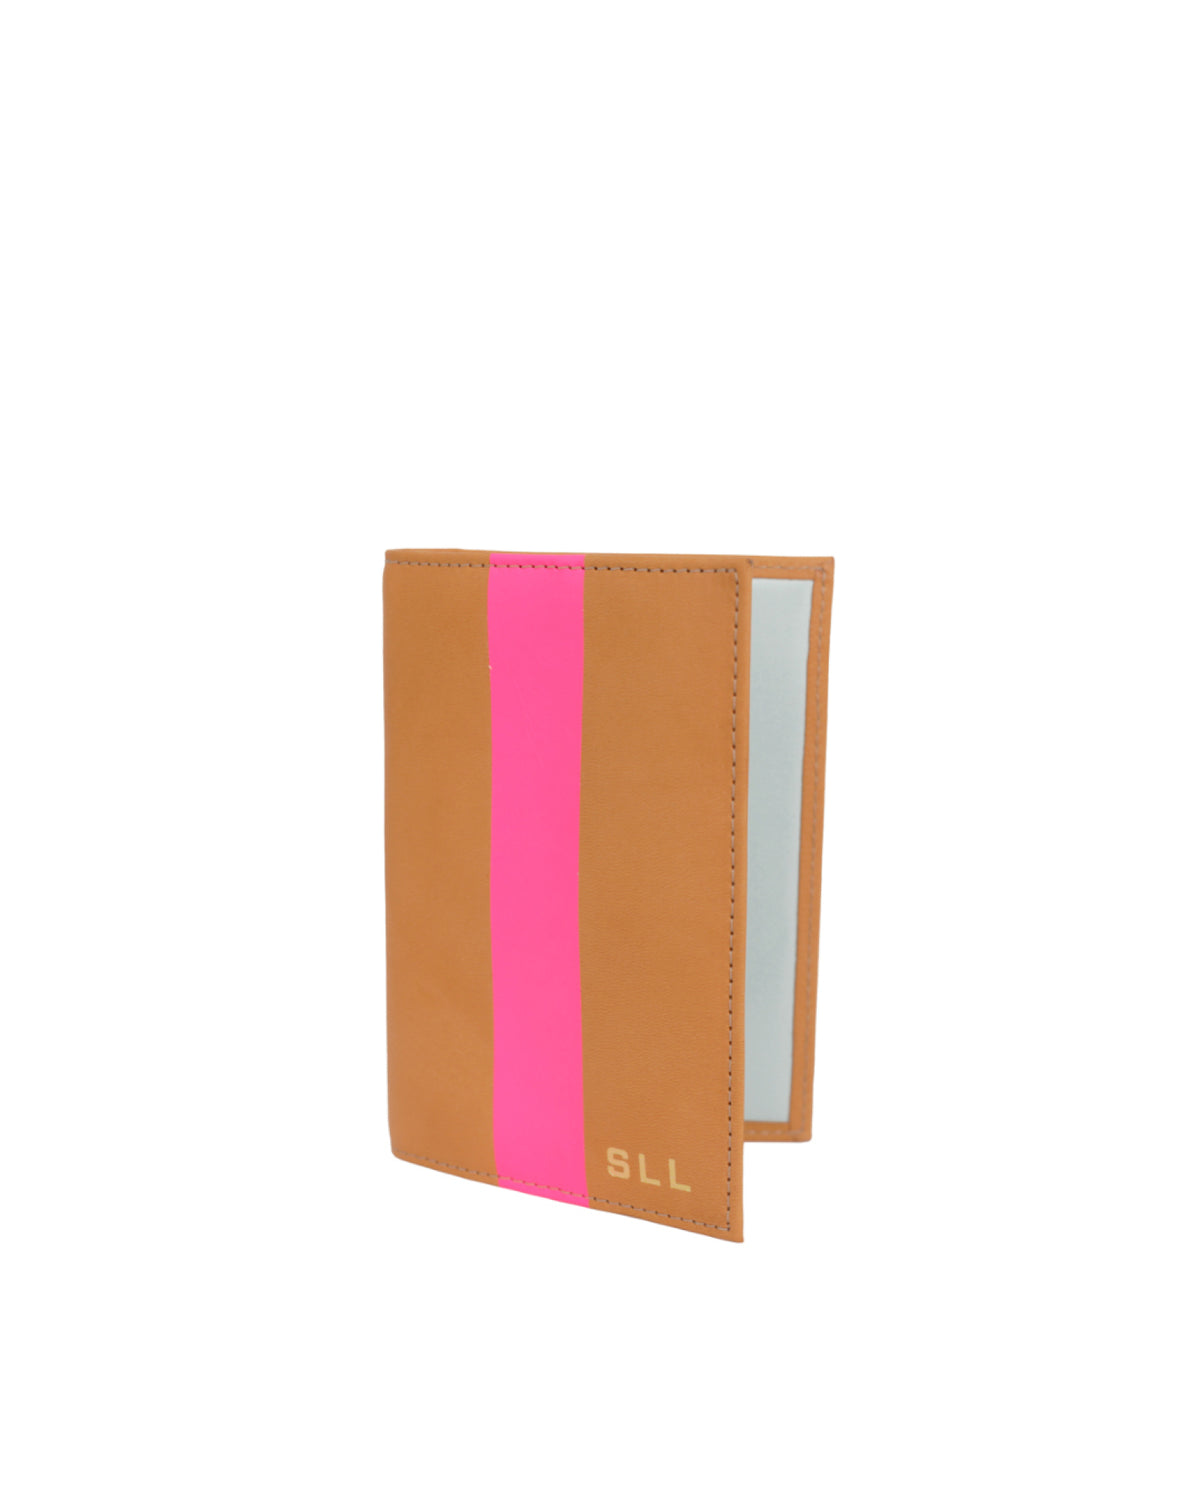 Cuoio with Neon Pink Stripe Passport Sleeve with Short Gold Monogram, Lower Right Corner Placement.